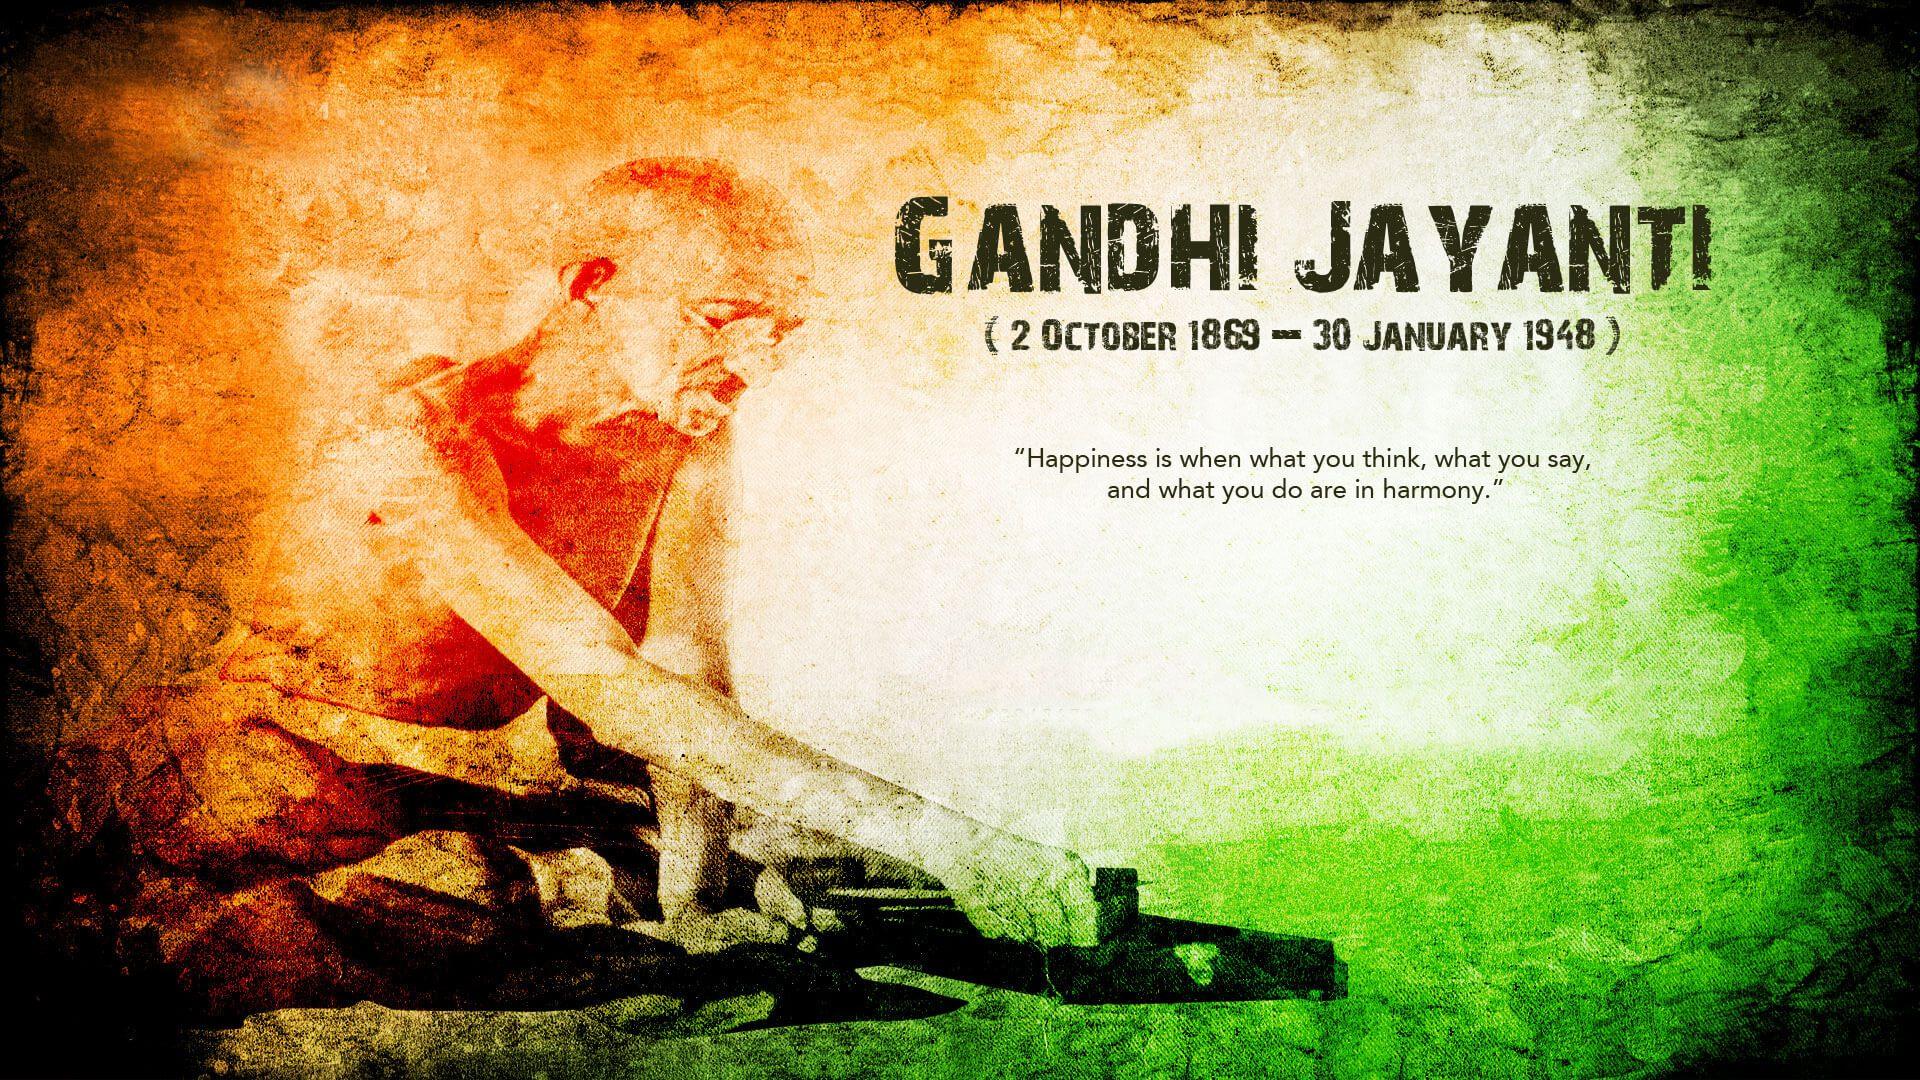 Happy Gandhi Jayanti 2019. Image, Quotes, Wishes, Messages